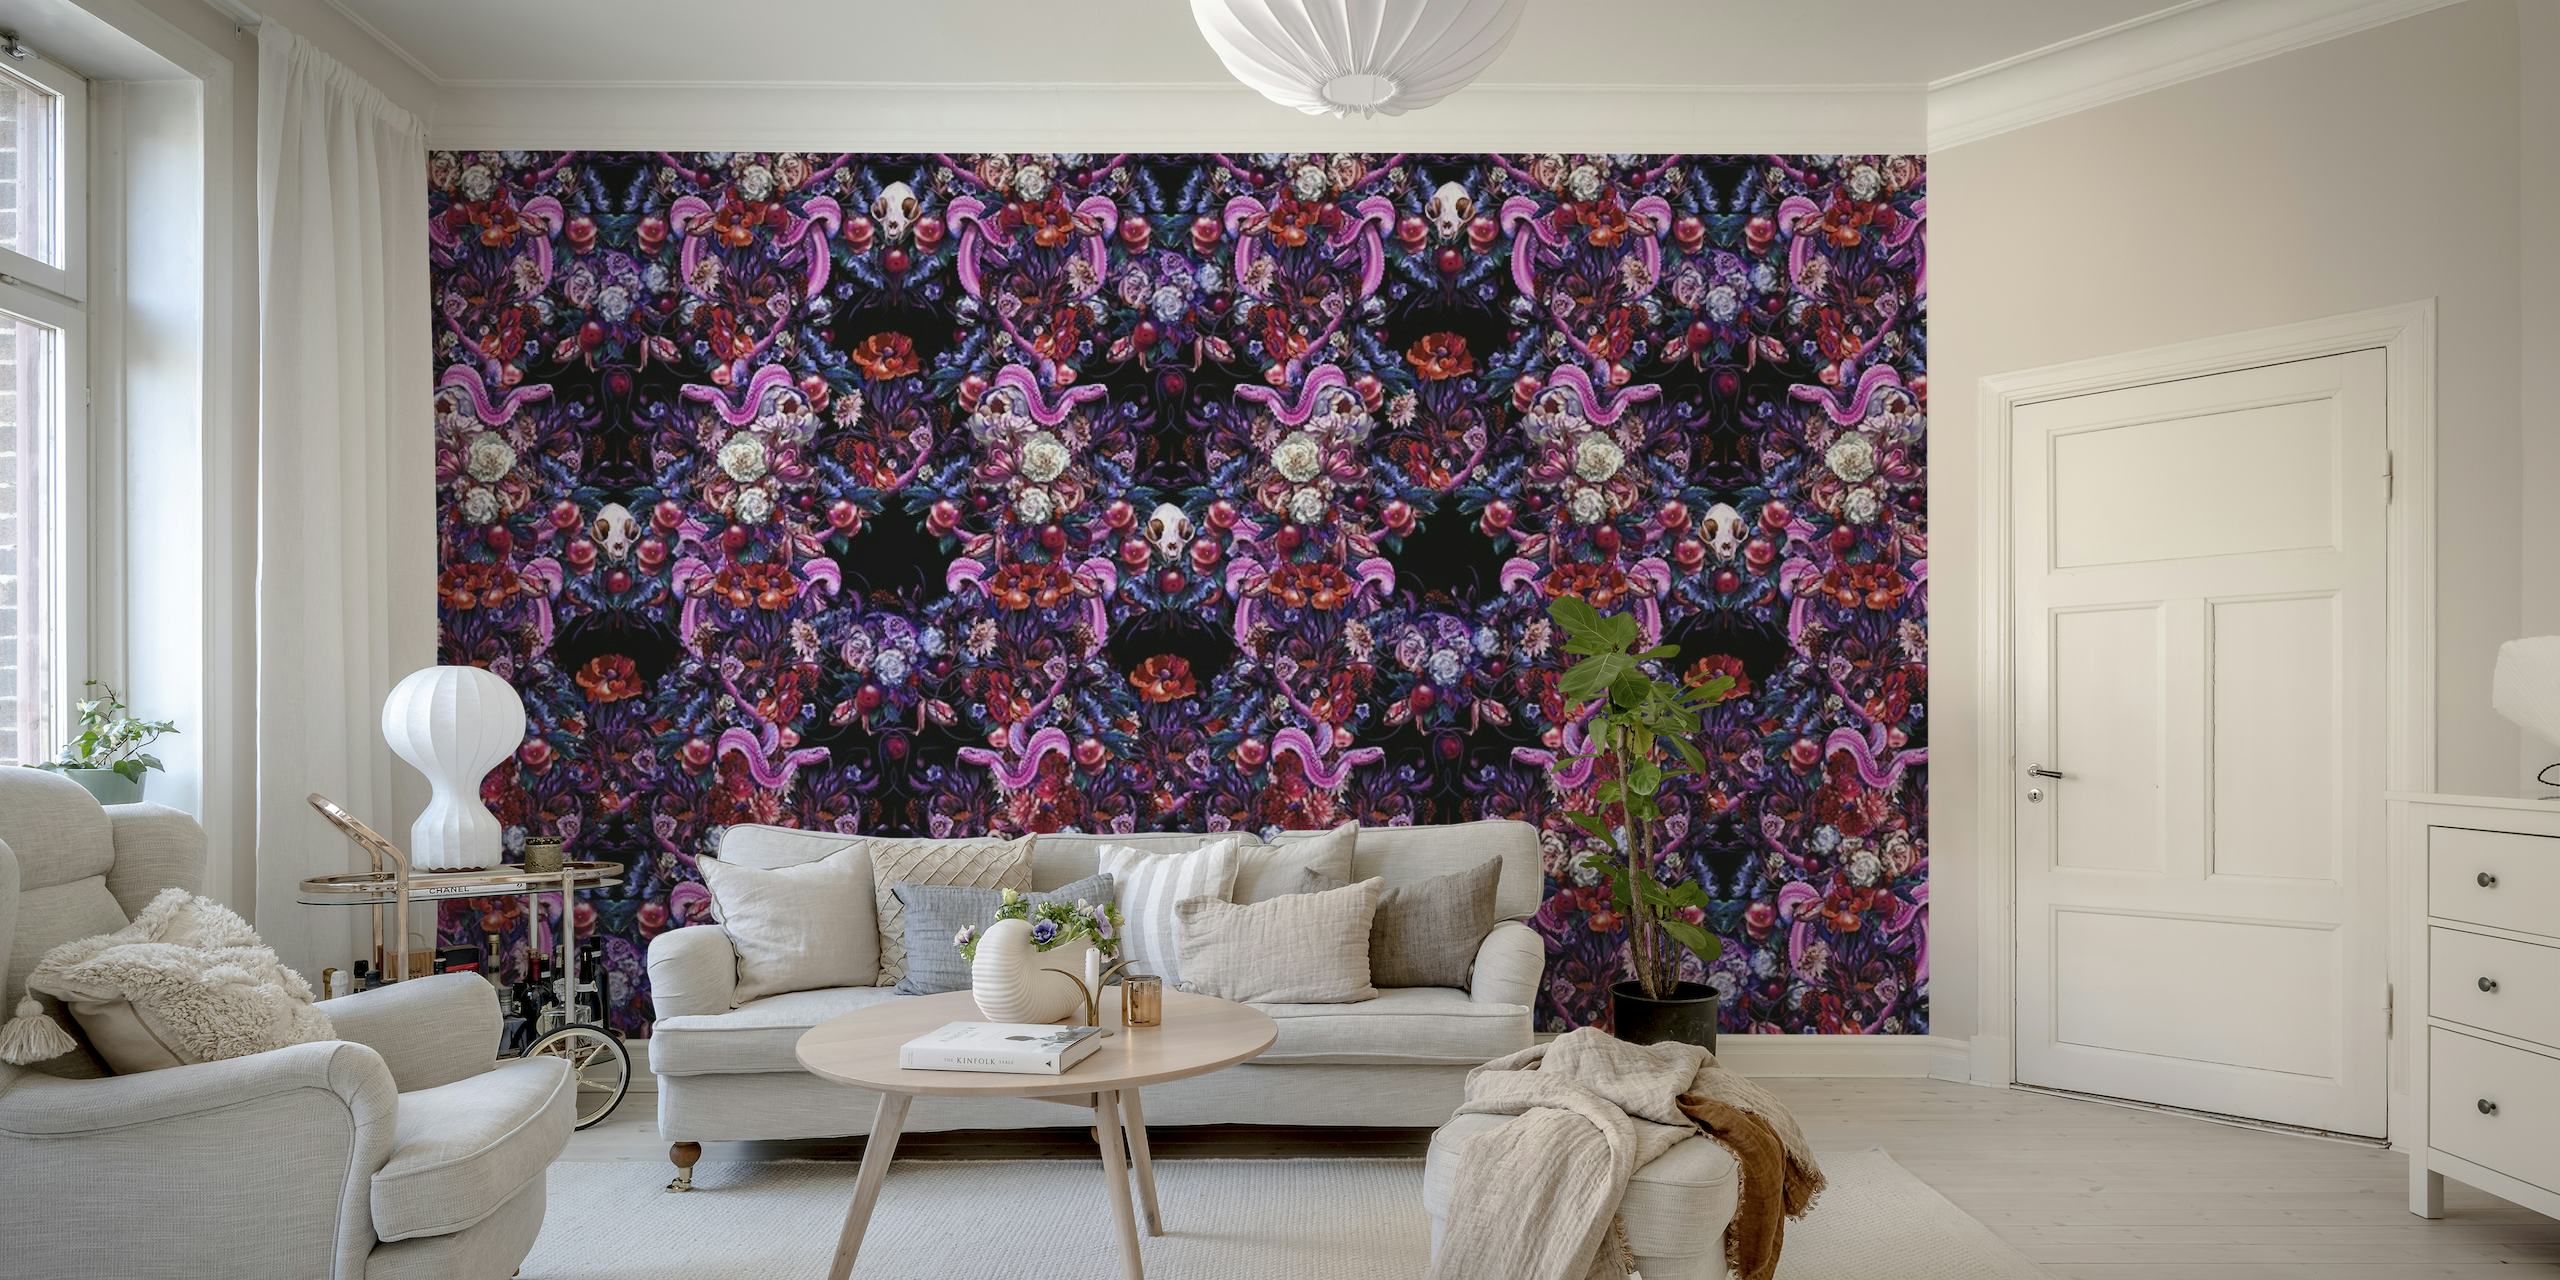 Gothic-inspired wall mural with a symmetrical pattern of snakes, skulls, and flowers in shades of purple, pink, and blue